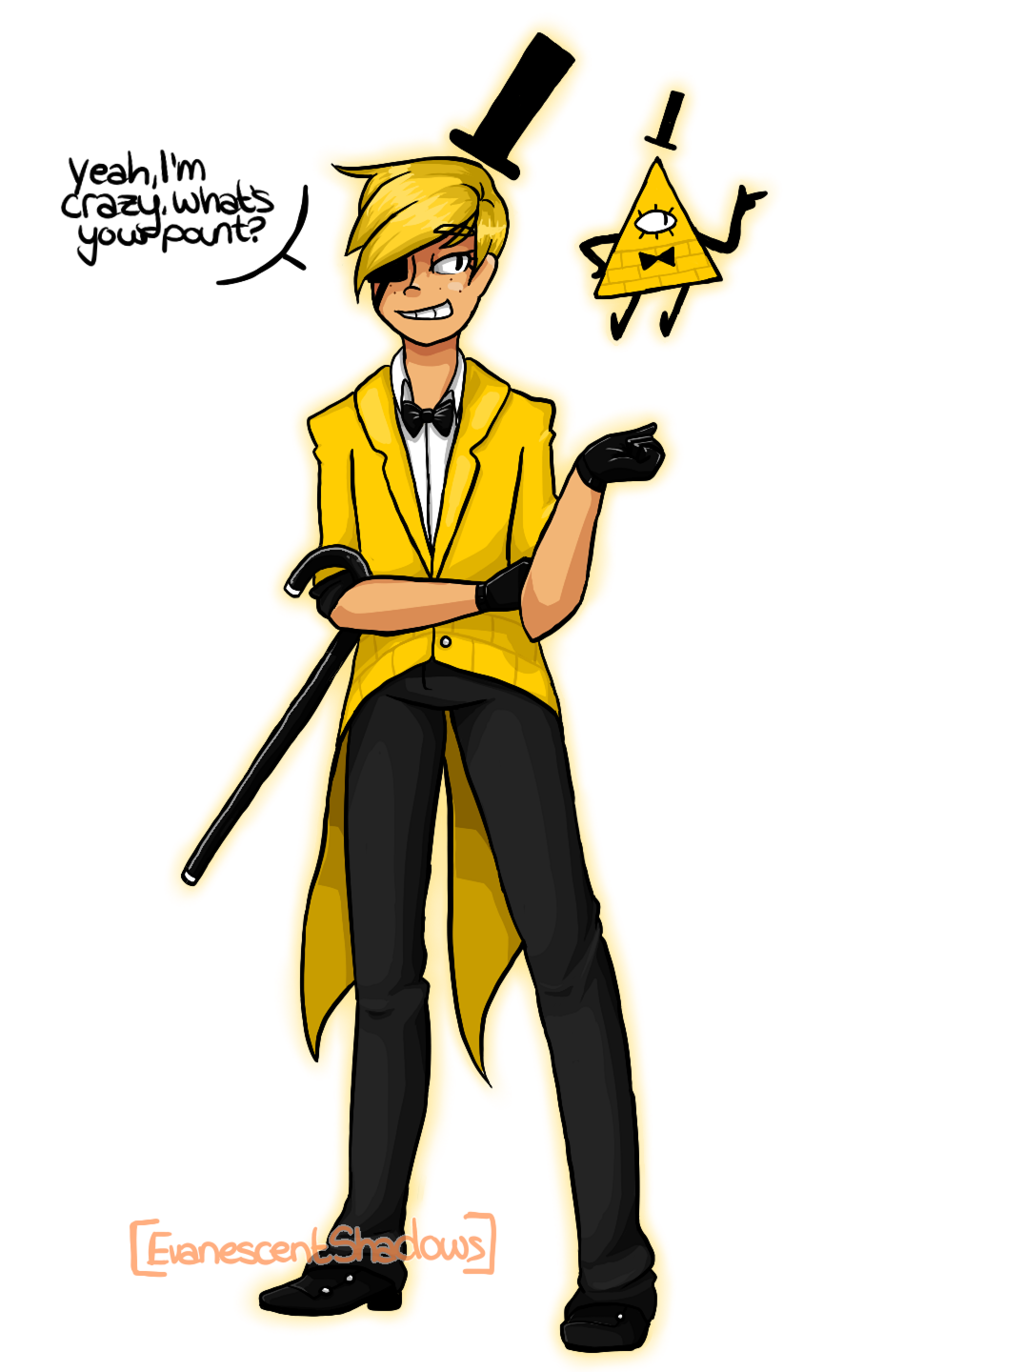 Human Bill Cipher by EvanescentShadows on